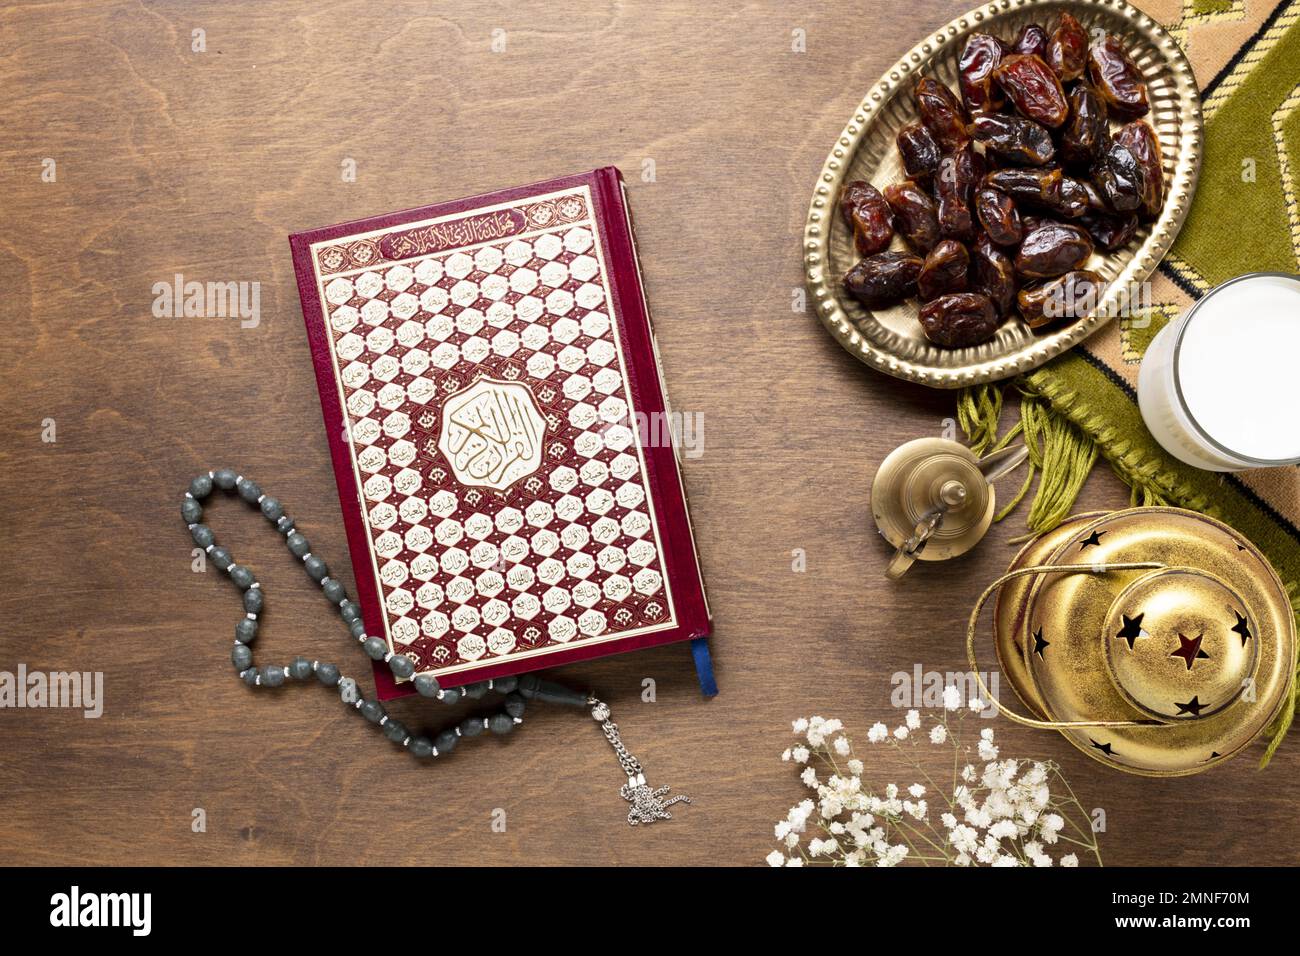 quran prayer beads wooden table. Resolution and high quality beautiful photo Stock Photo